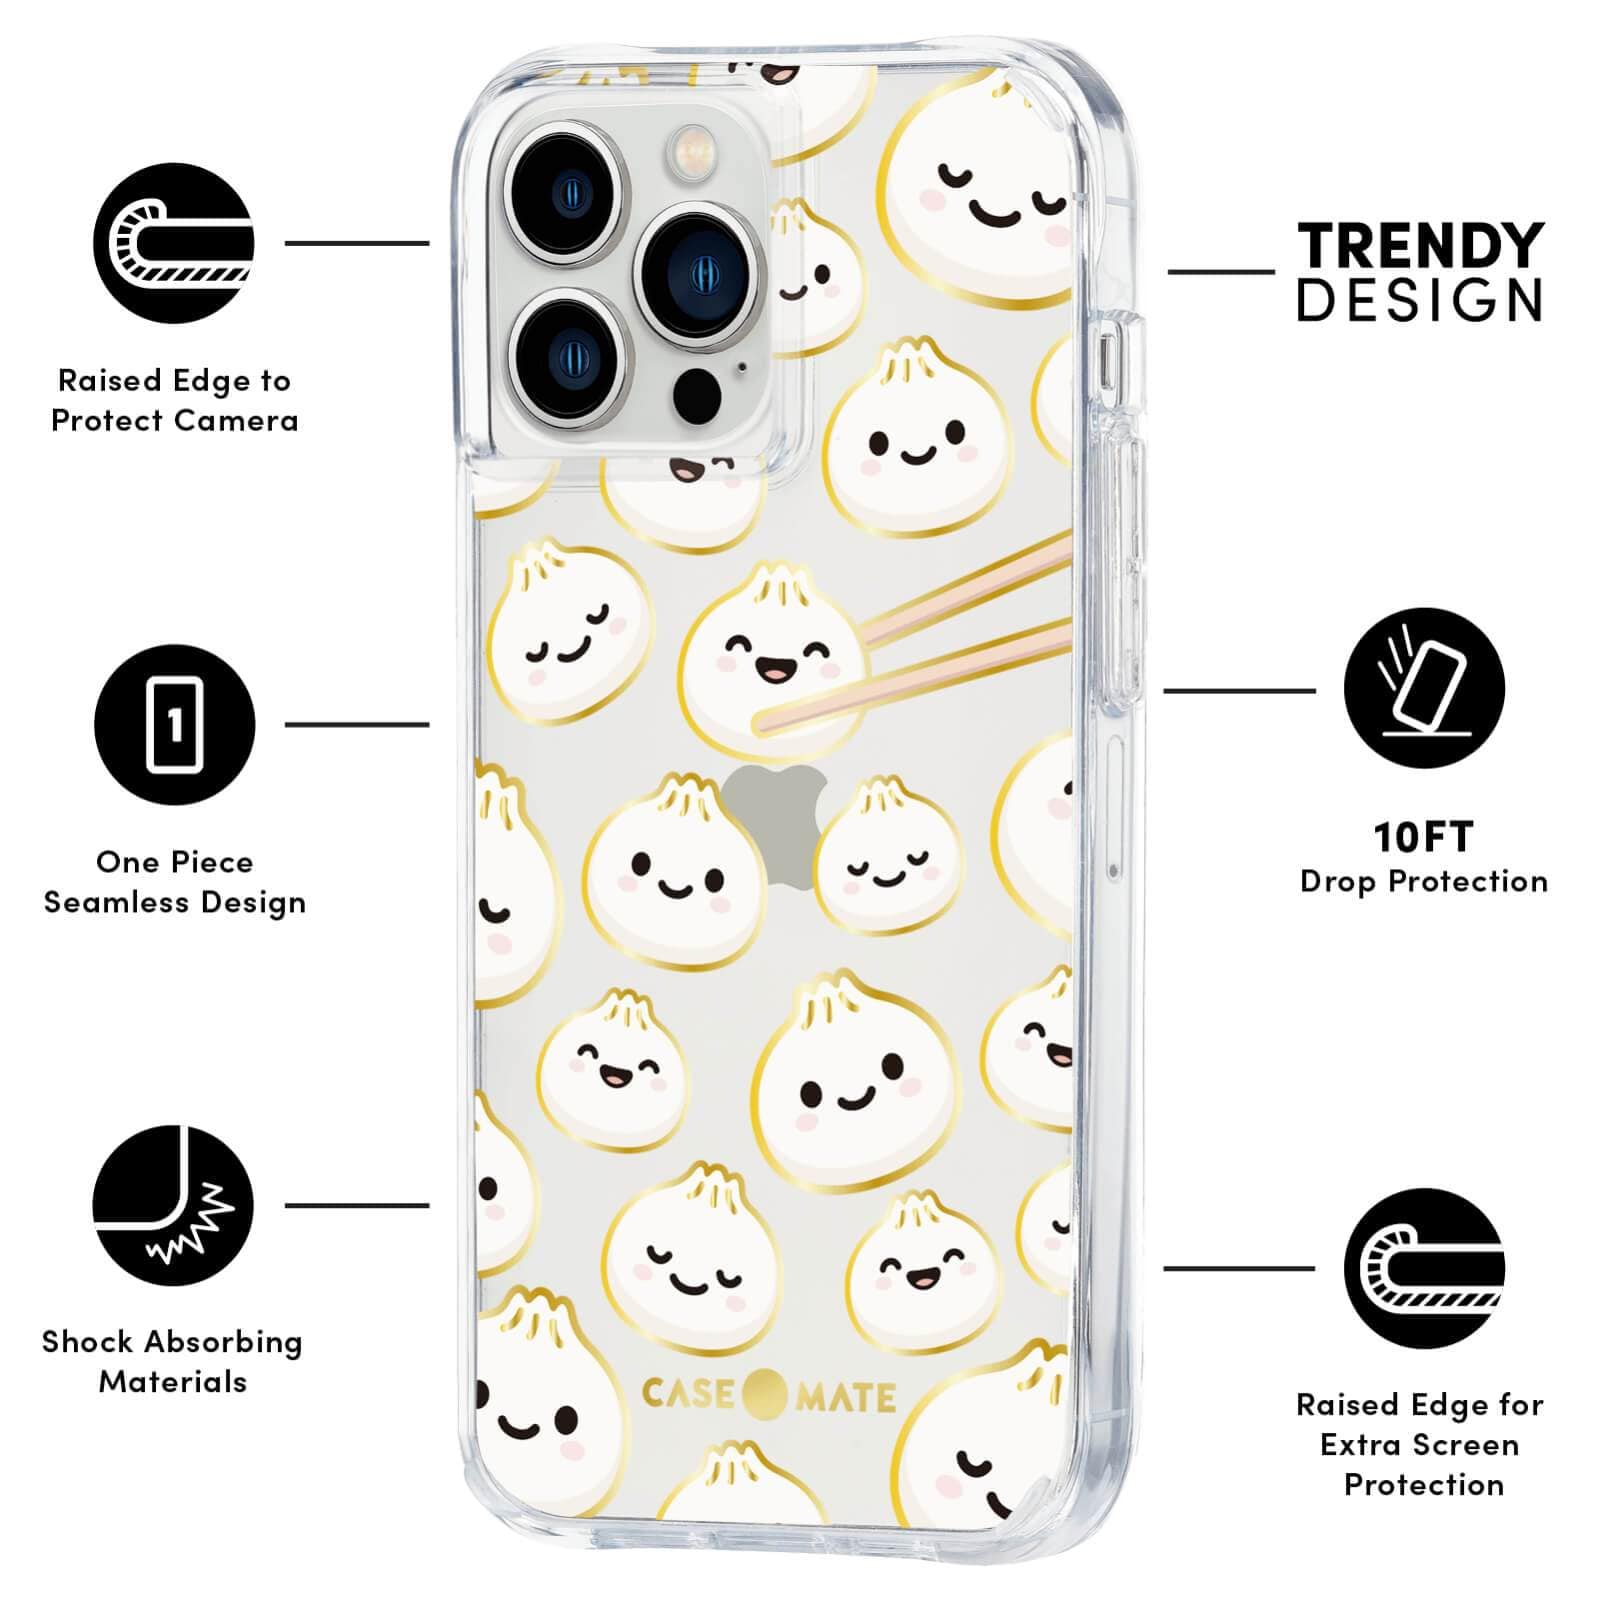 FEATURES: RAISED CAMERA TO PROTECT CAMERA, ONE PIECE SEAMLESS DESIGN, SHOCK ABSORBING MATERIALS, TRENDY DESIGN, 10 FT DROP PROTECTION, RAISED EDGE FOR EXTRA SCREEN PROTECTION. COLOR::CUTE AS A DUMPLING